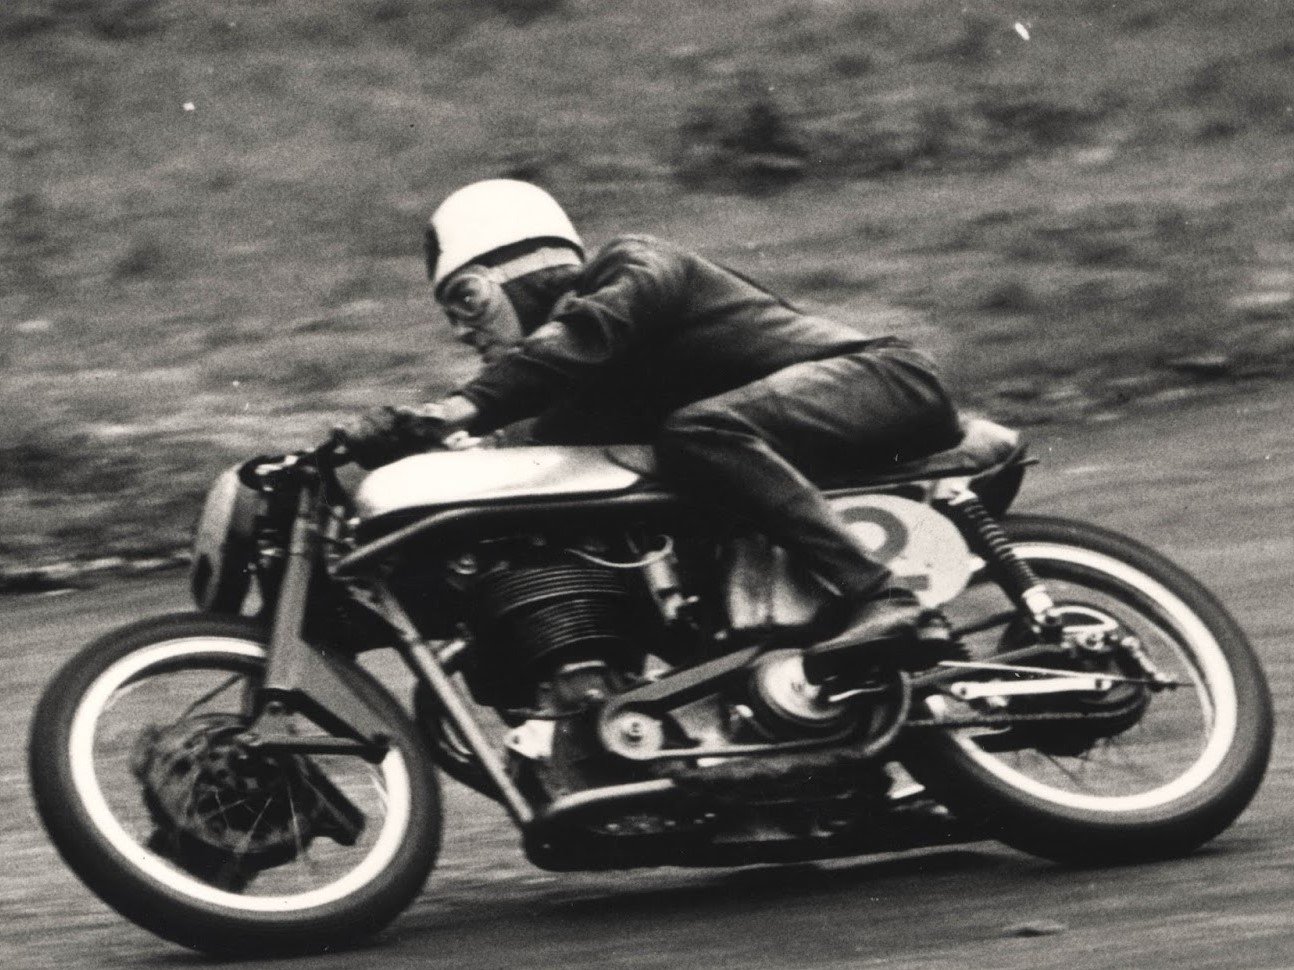 Since 1911, the Tourist Trophy's Snaefell Mountain Course on Britain's Isle of Man has sent 258 motorbike racers to their deaths, or an average of 2.4 a year.